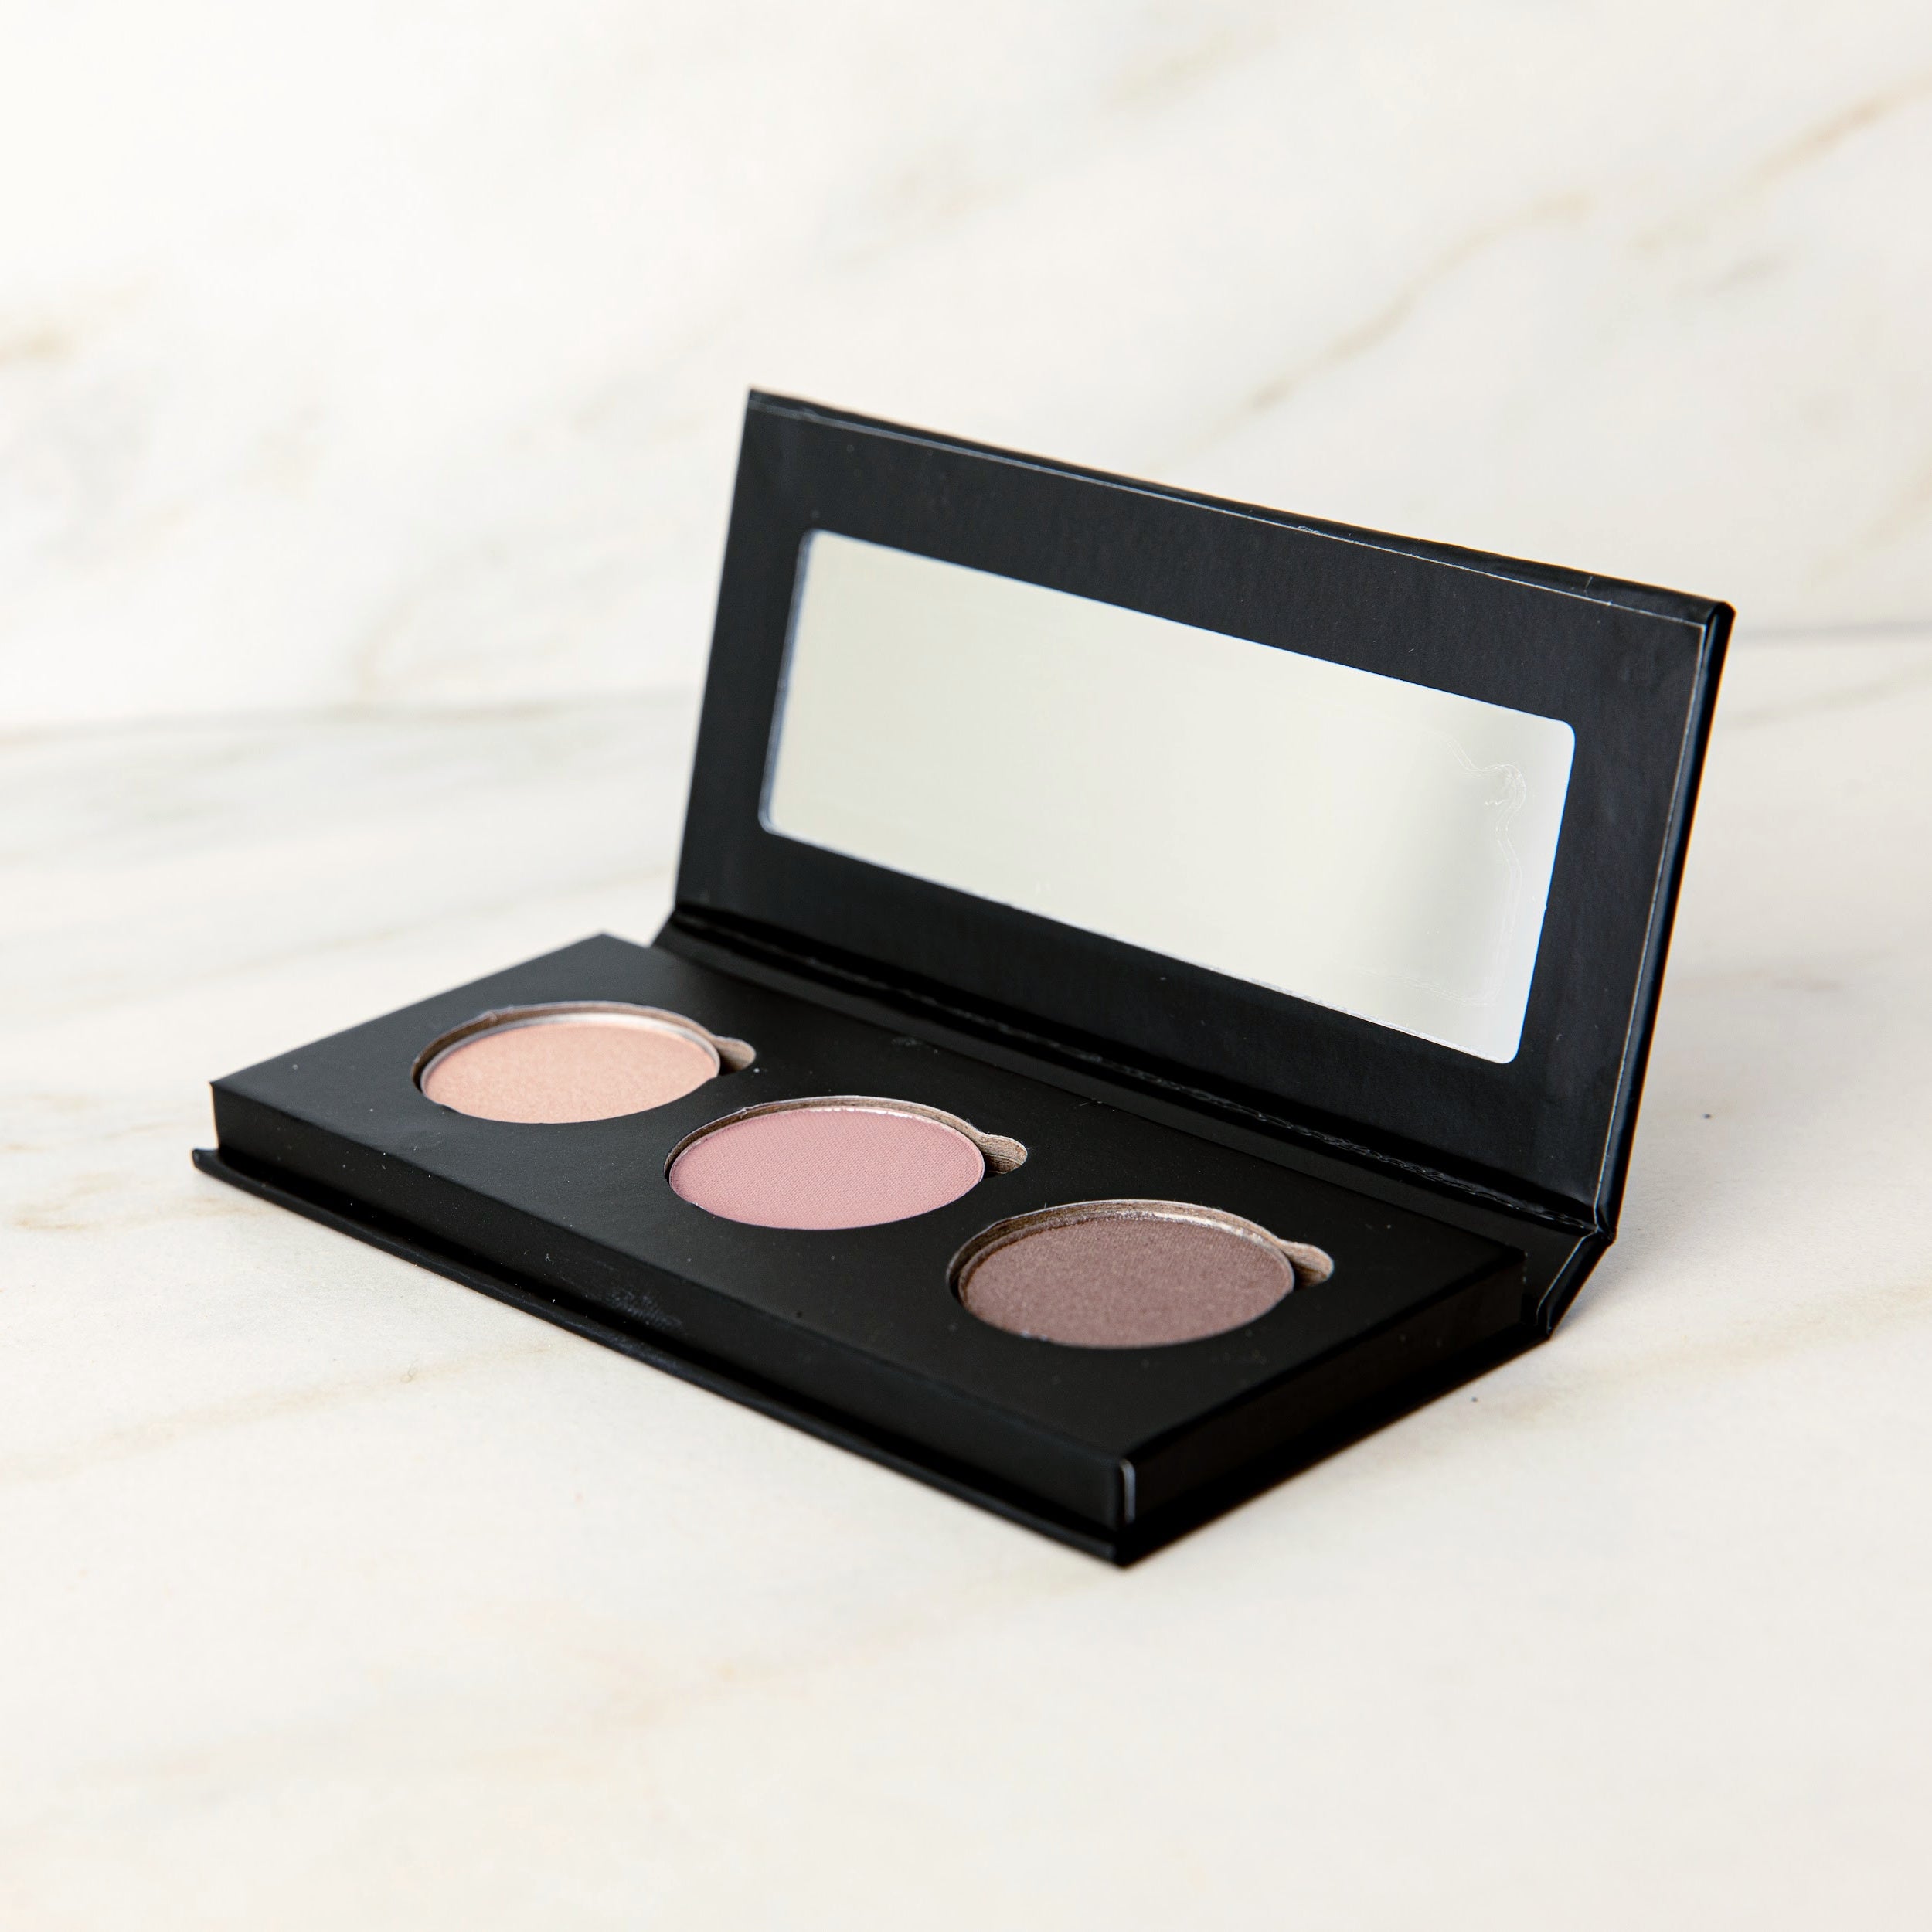 Makeup Eye Natural Co Toups and Palette – Organics